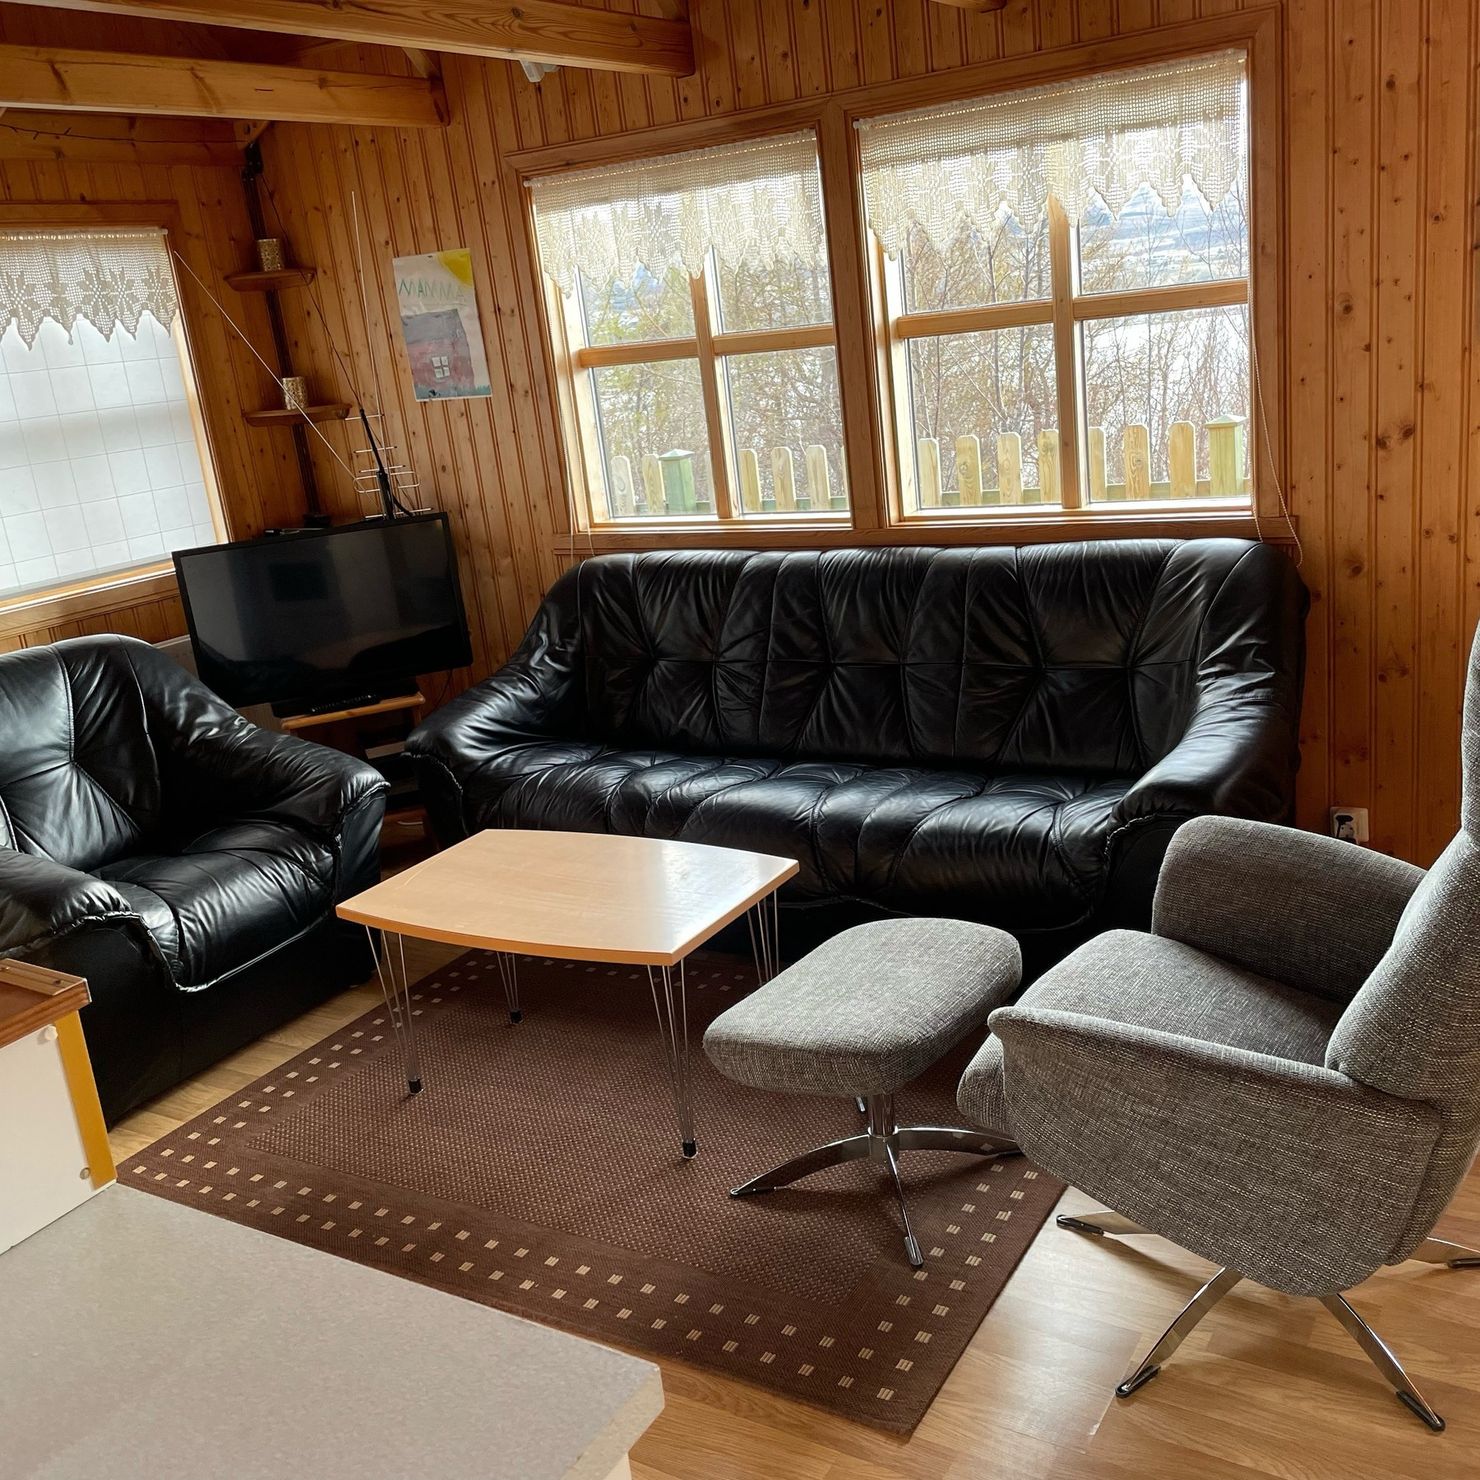 Comfortable armchairs and a large couch in the living area